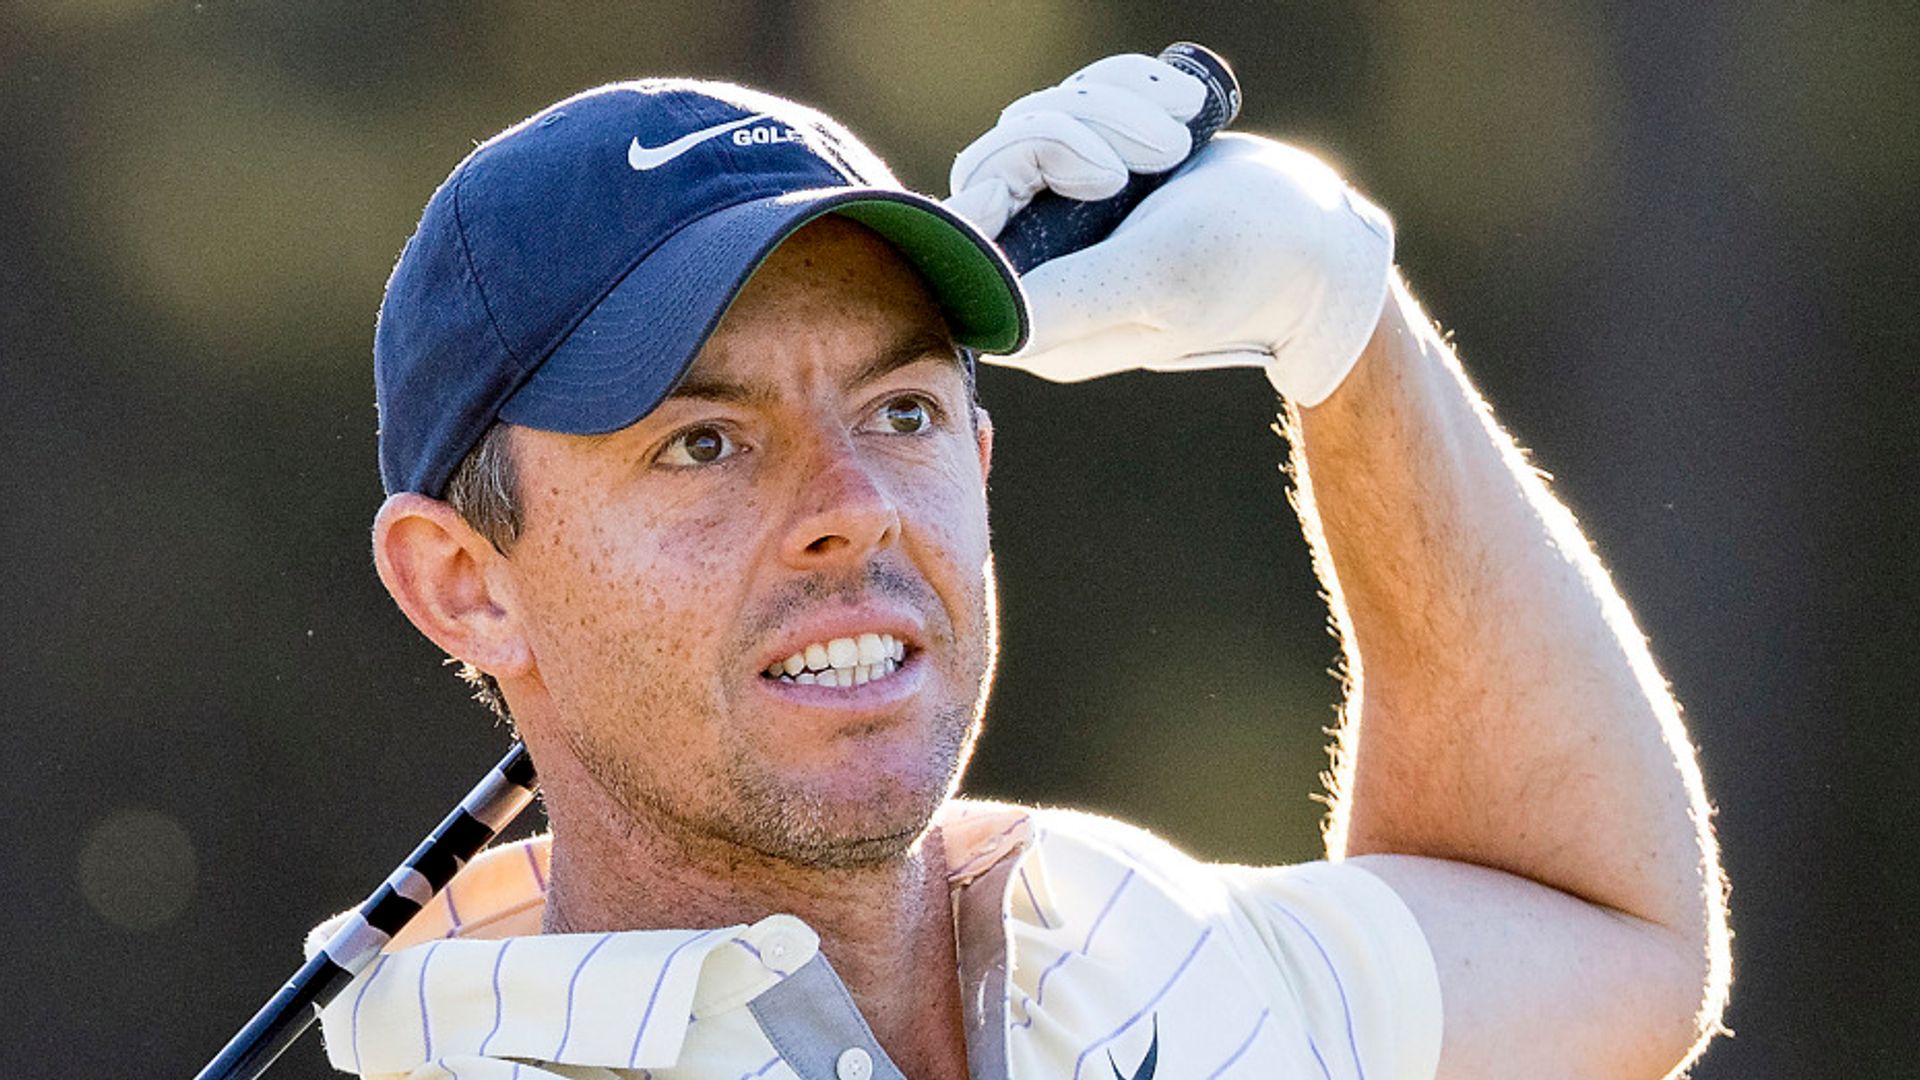 McIlroy chases CJ Cup win and return to world No 1 LIVE!